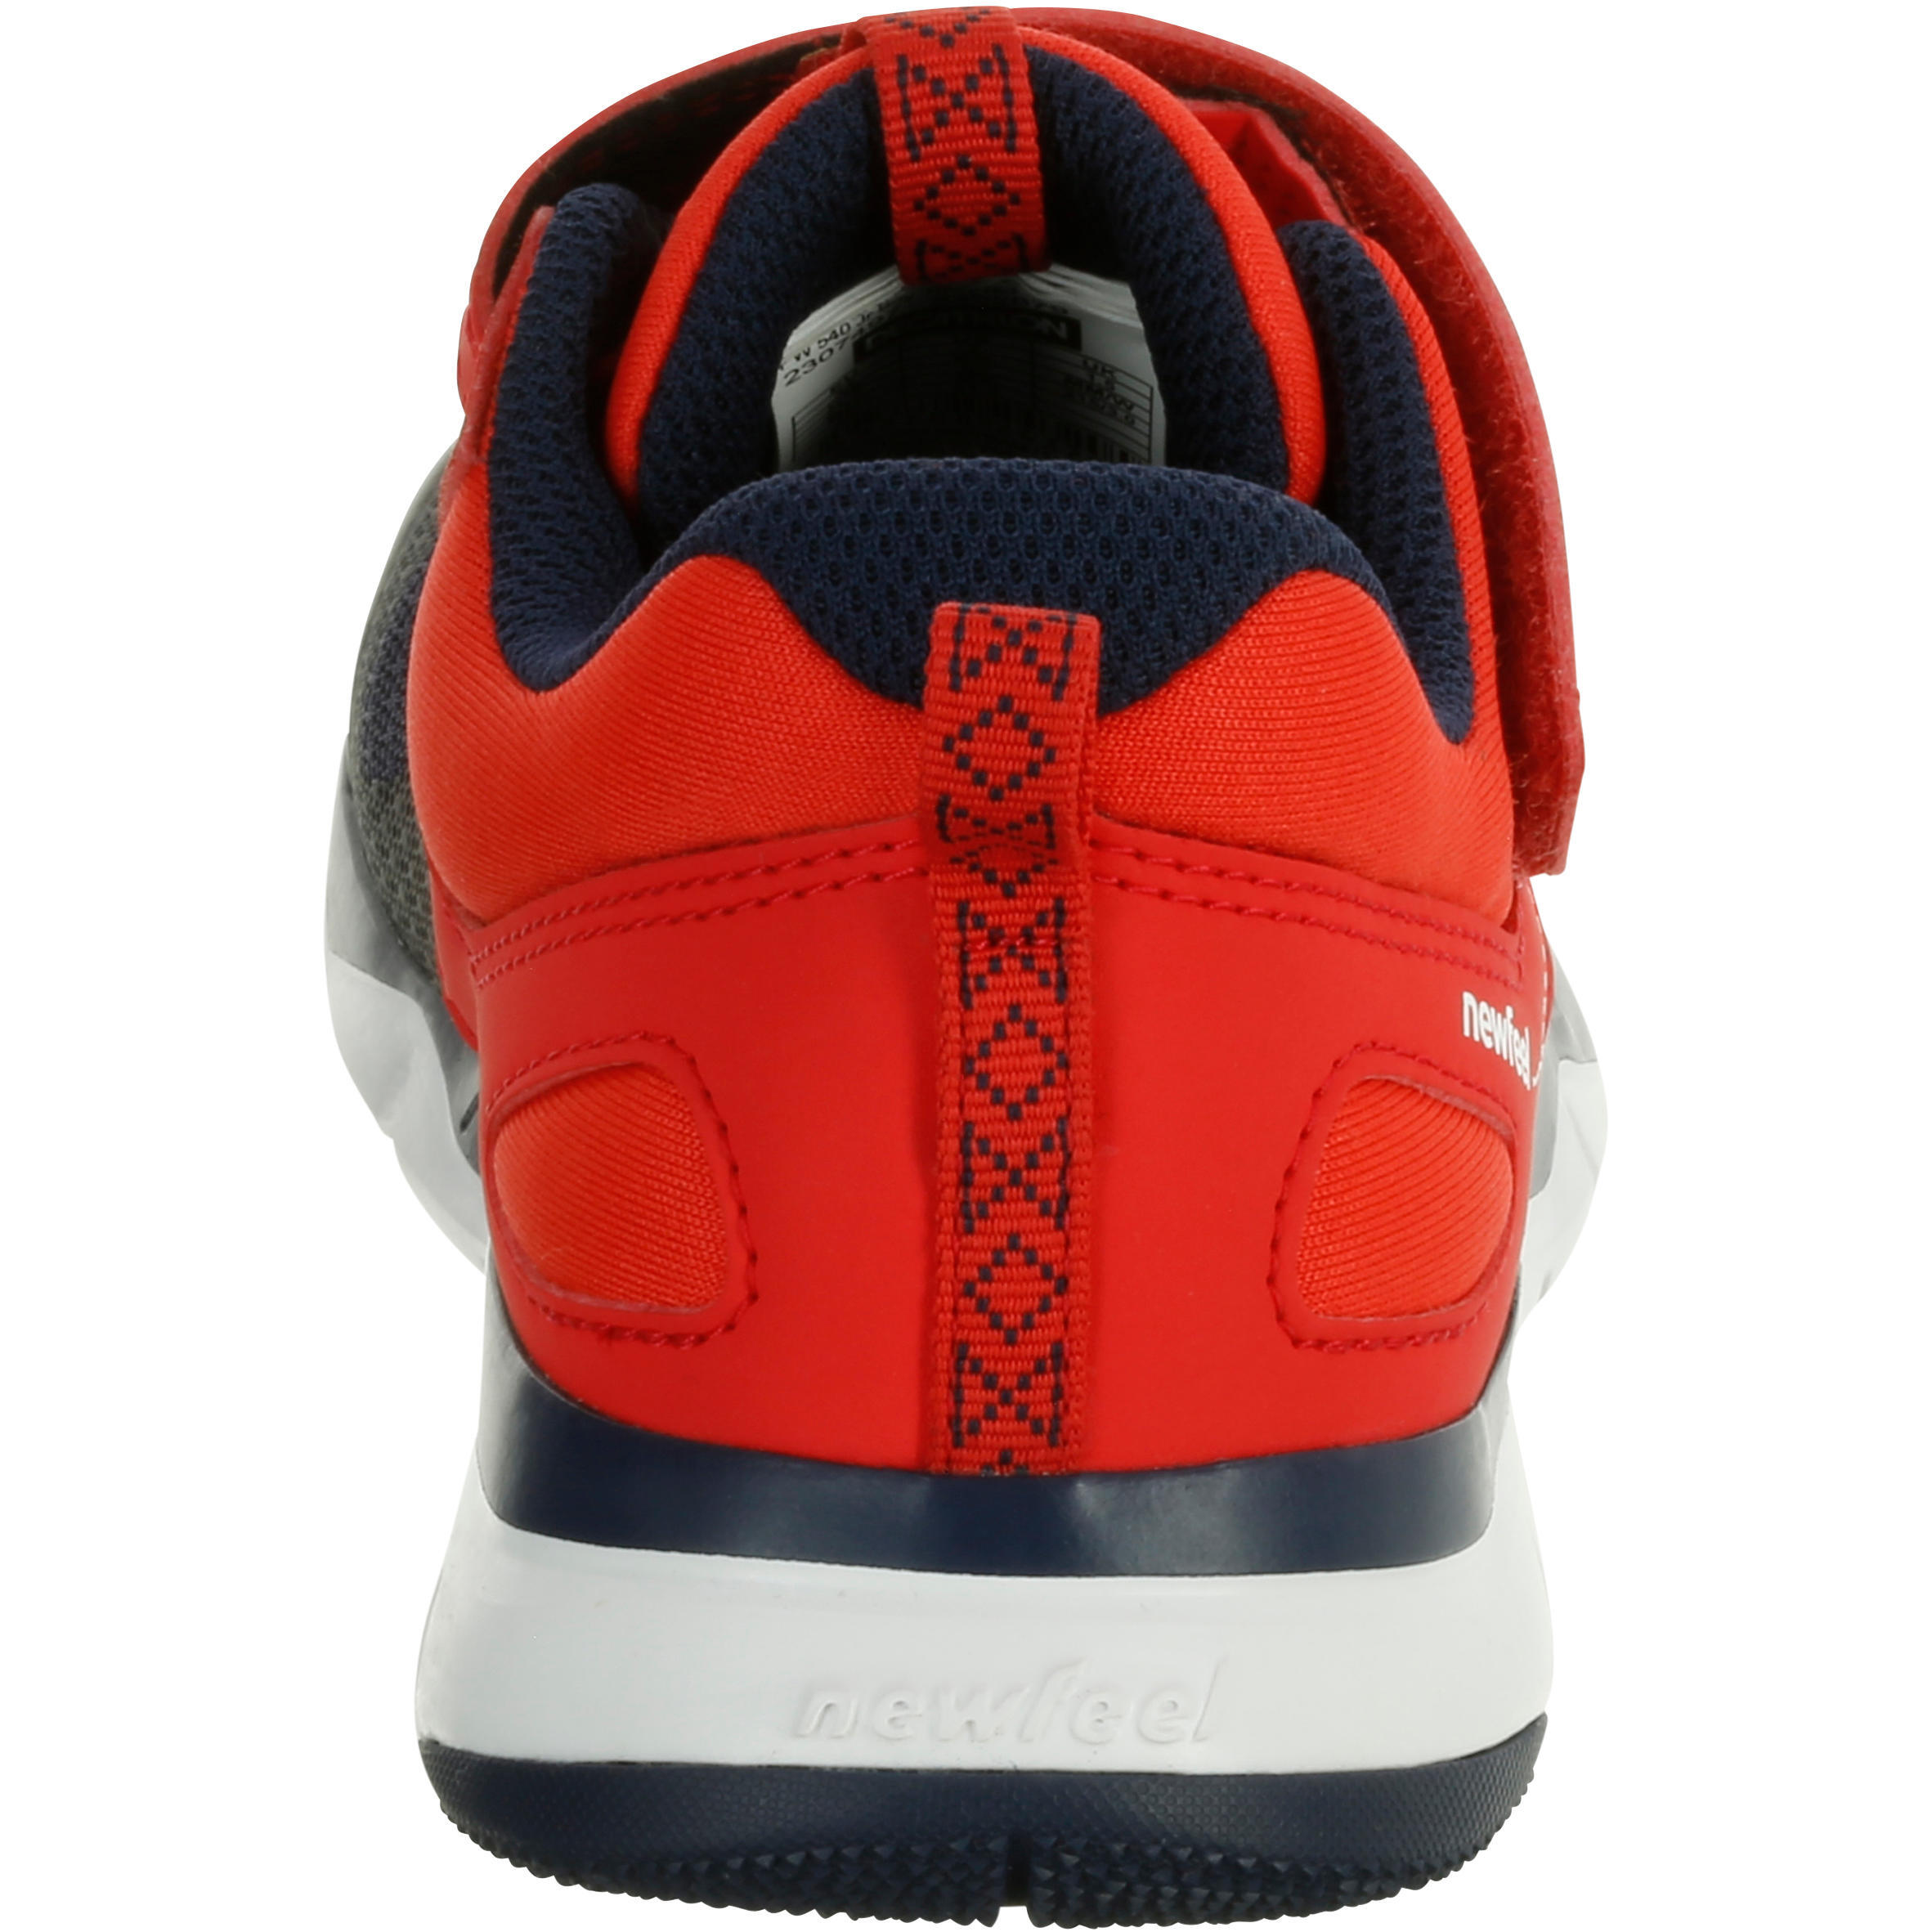 Kids' lightweight and breathable rip-tab trainers, red/black 5/8